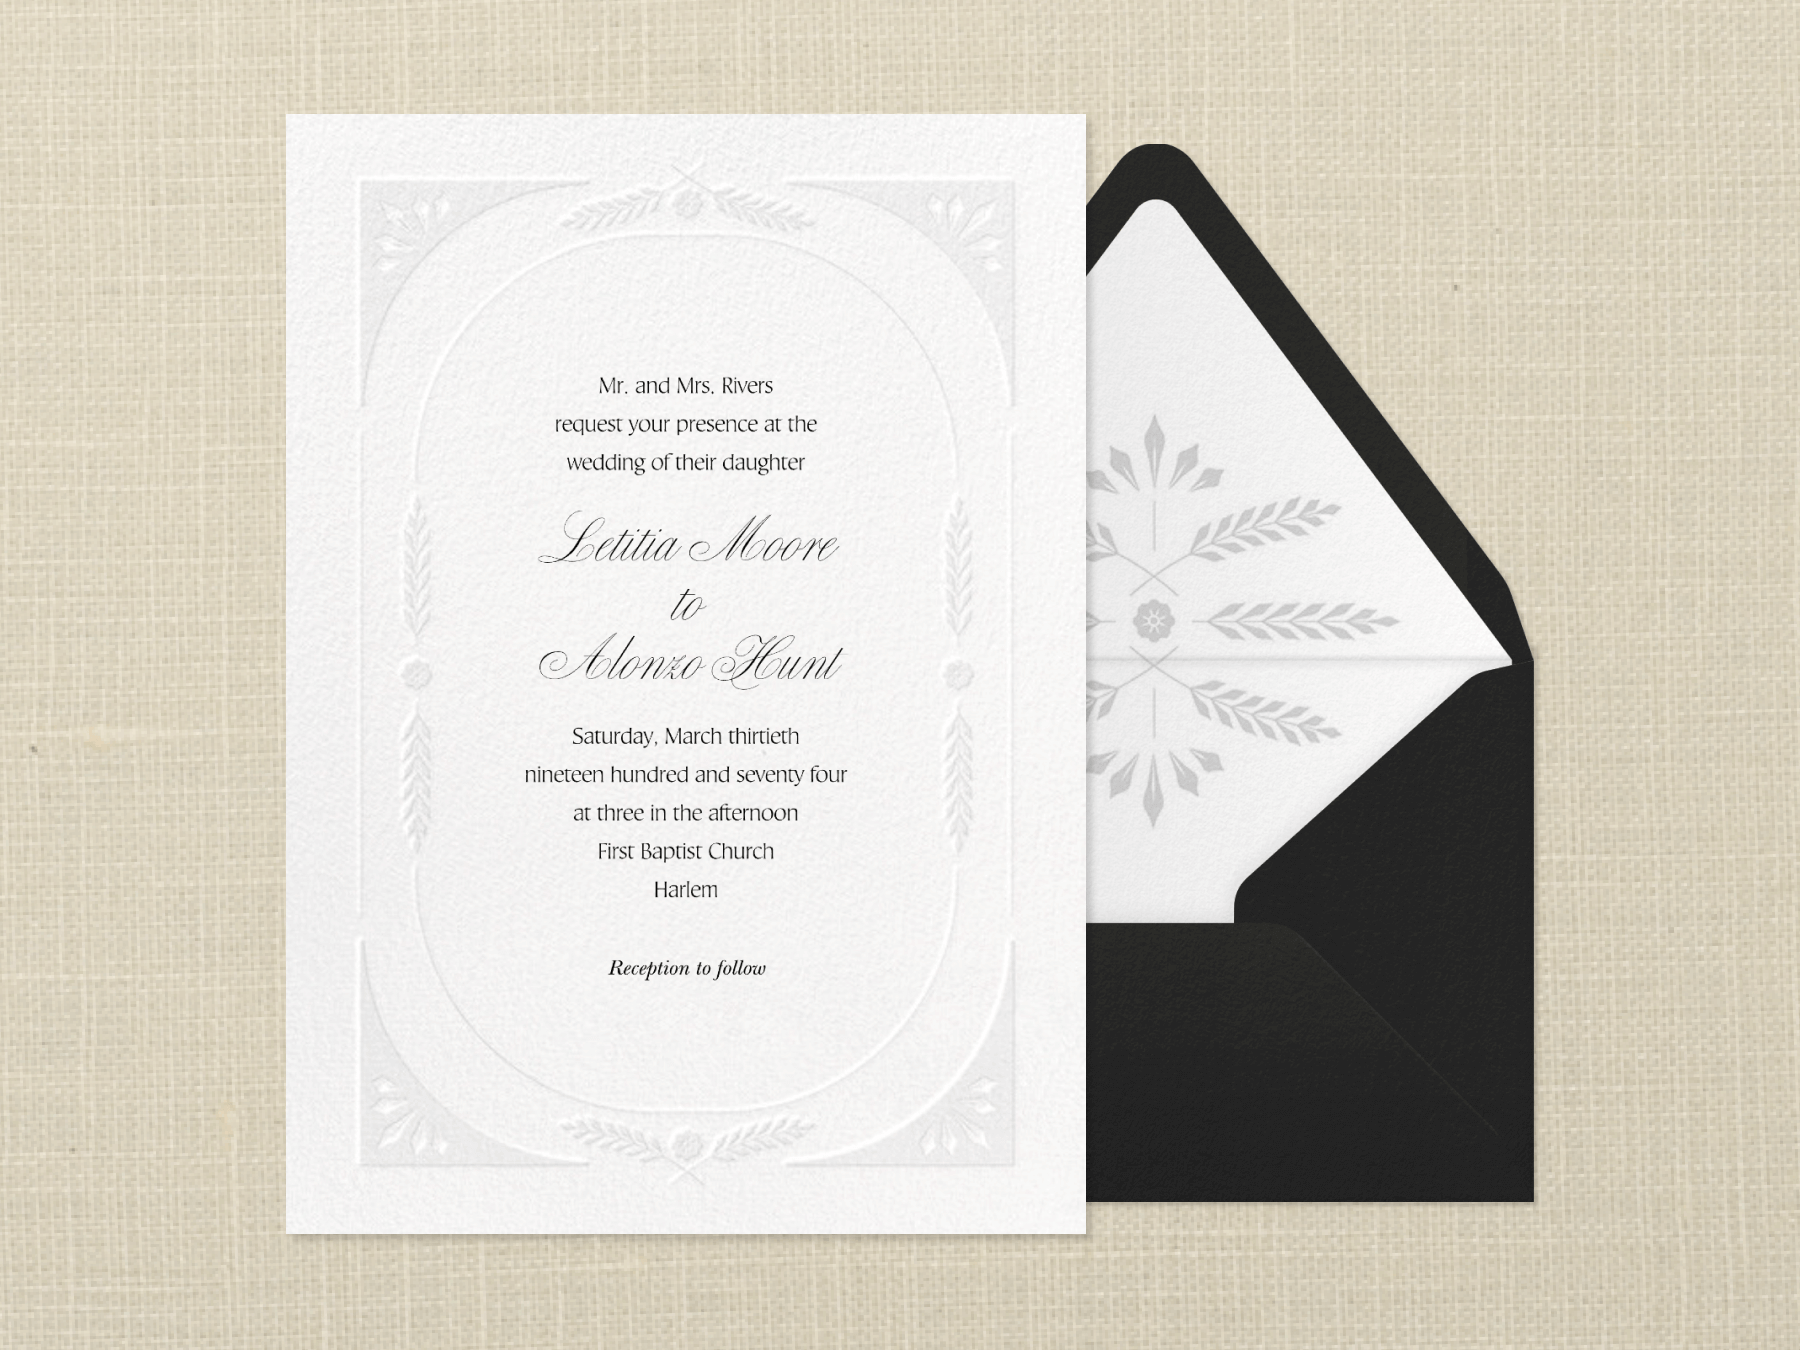 A white wedding invitation with blind embossed wheat border beside a black envelope with white liner with gray wheat sprigs and a textured neutral background.